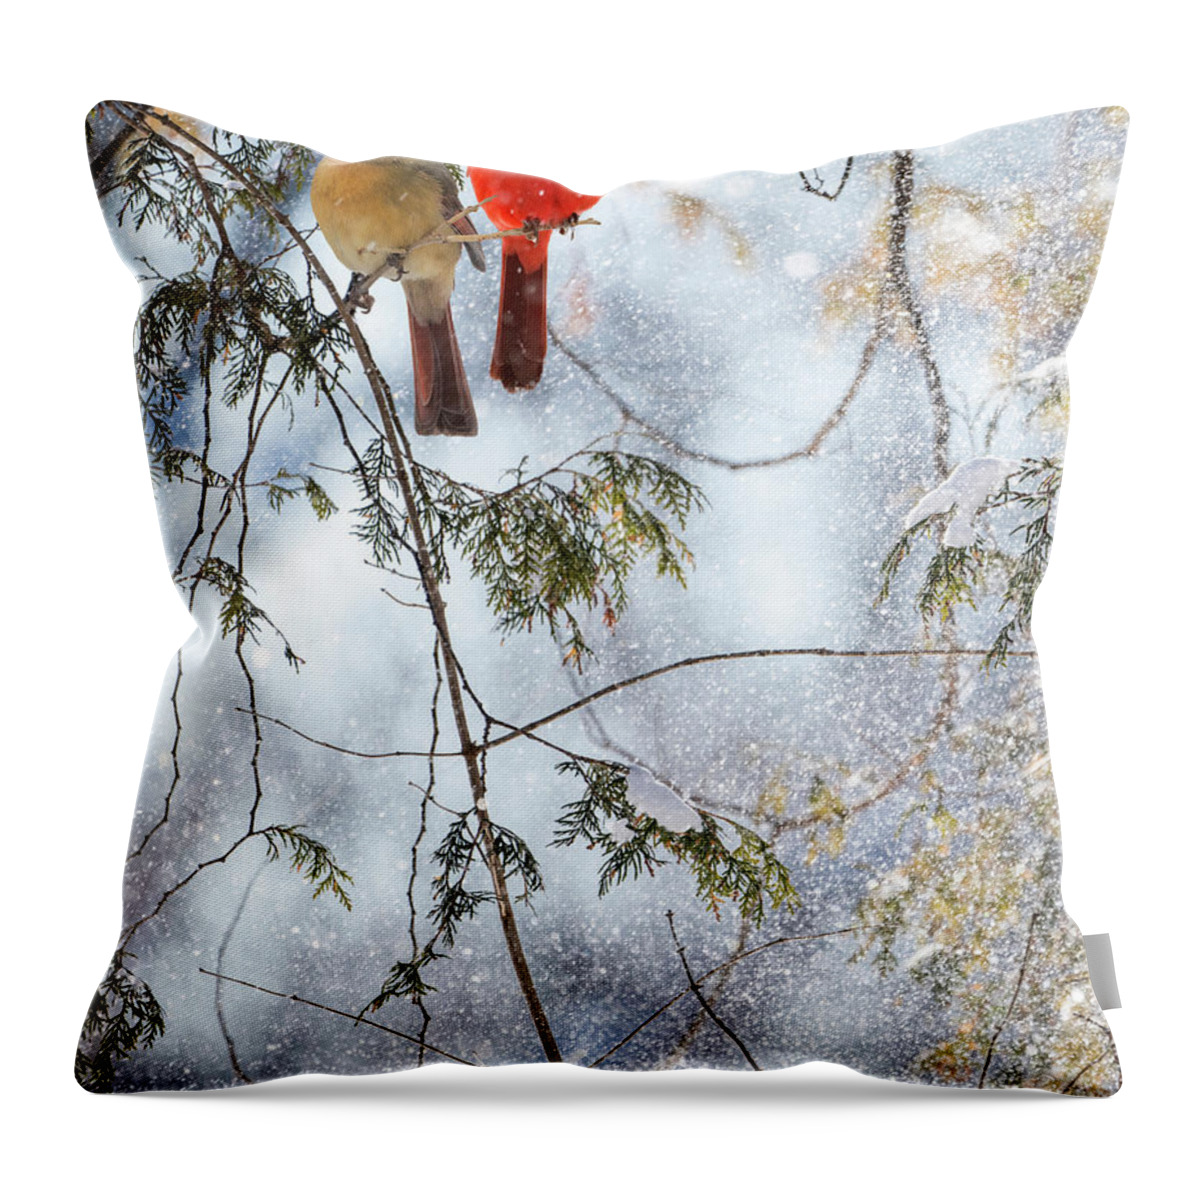 Northern Cardinals Throw Pillow featuring the photograph Northern Cardinal Love Story by Sandra Rust